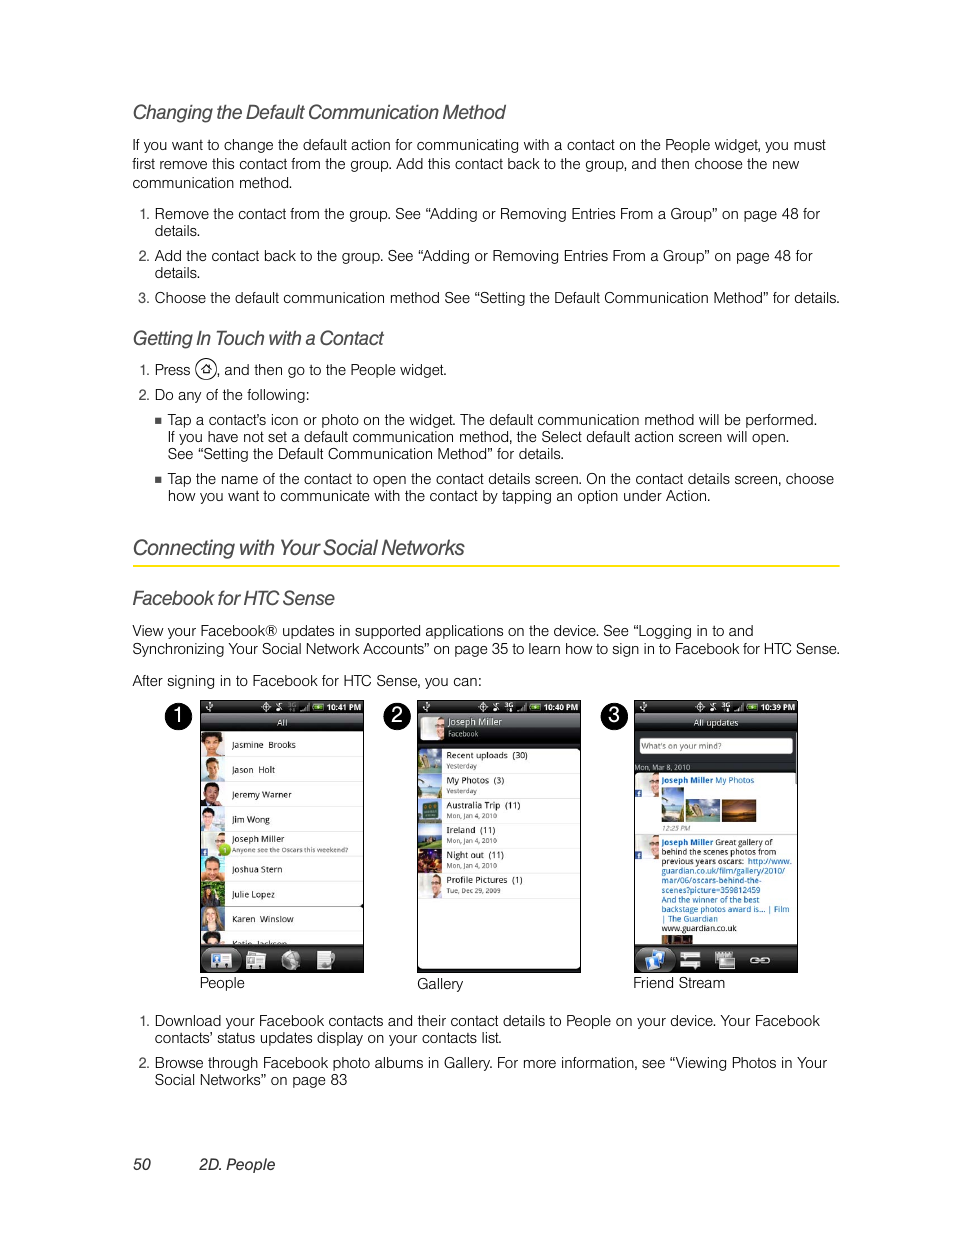 Changing the default communication method, Getting in touch with a contact, Connecting with your social networks | Facebook for htc sense | HTC EVO 4G User Manual | Page 60 / 197